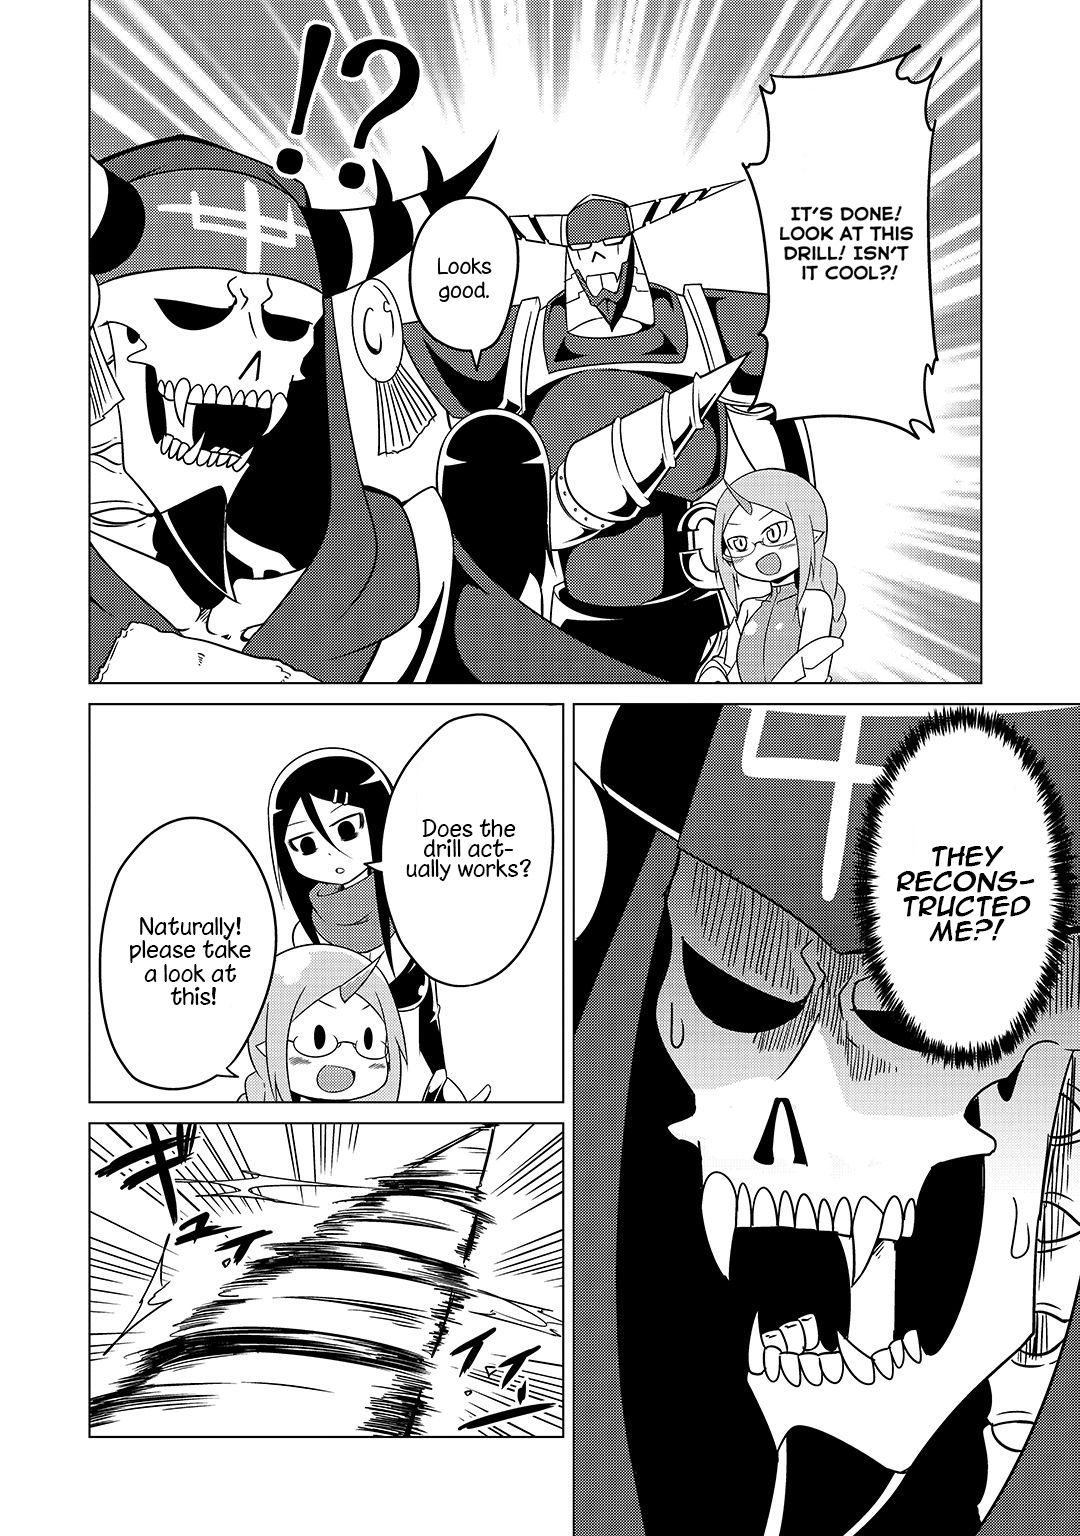 The Devil is Troubled by the Suicidal Heroine - chapter 9.3 - #3